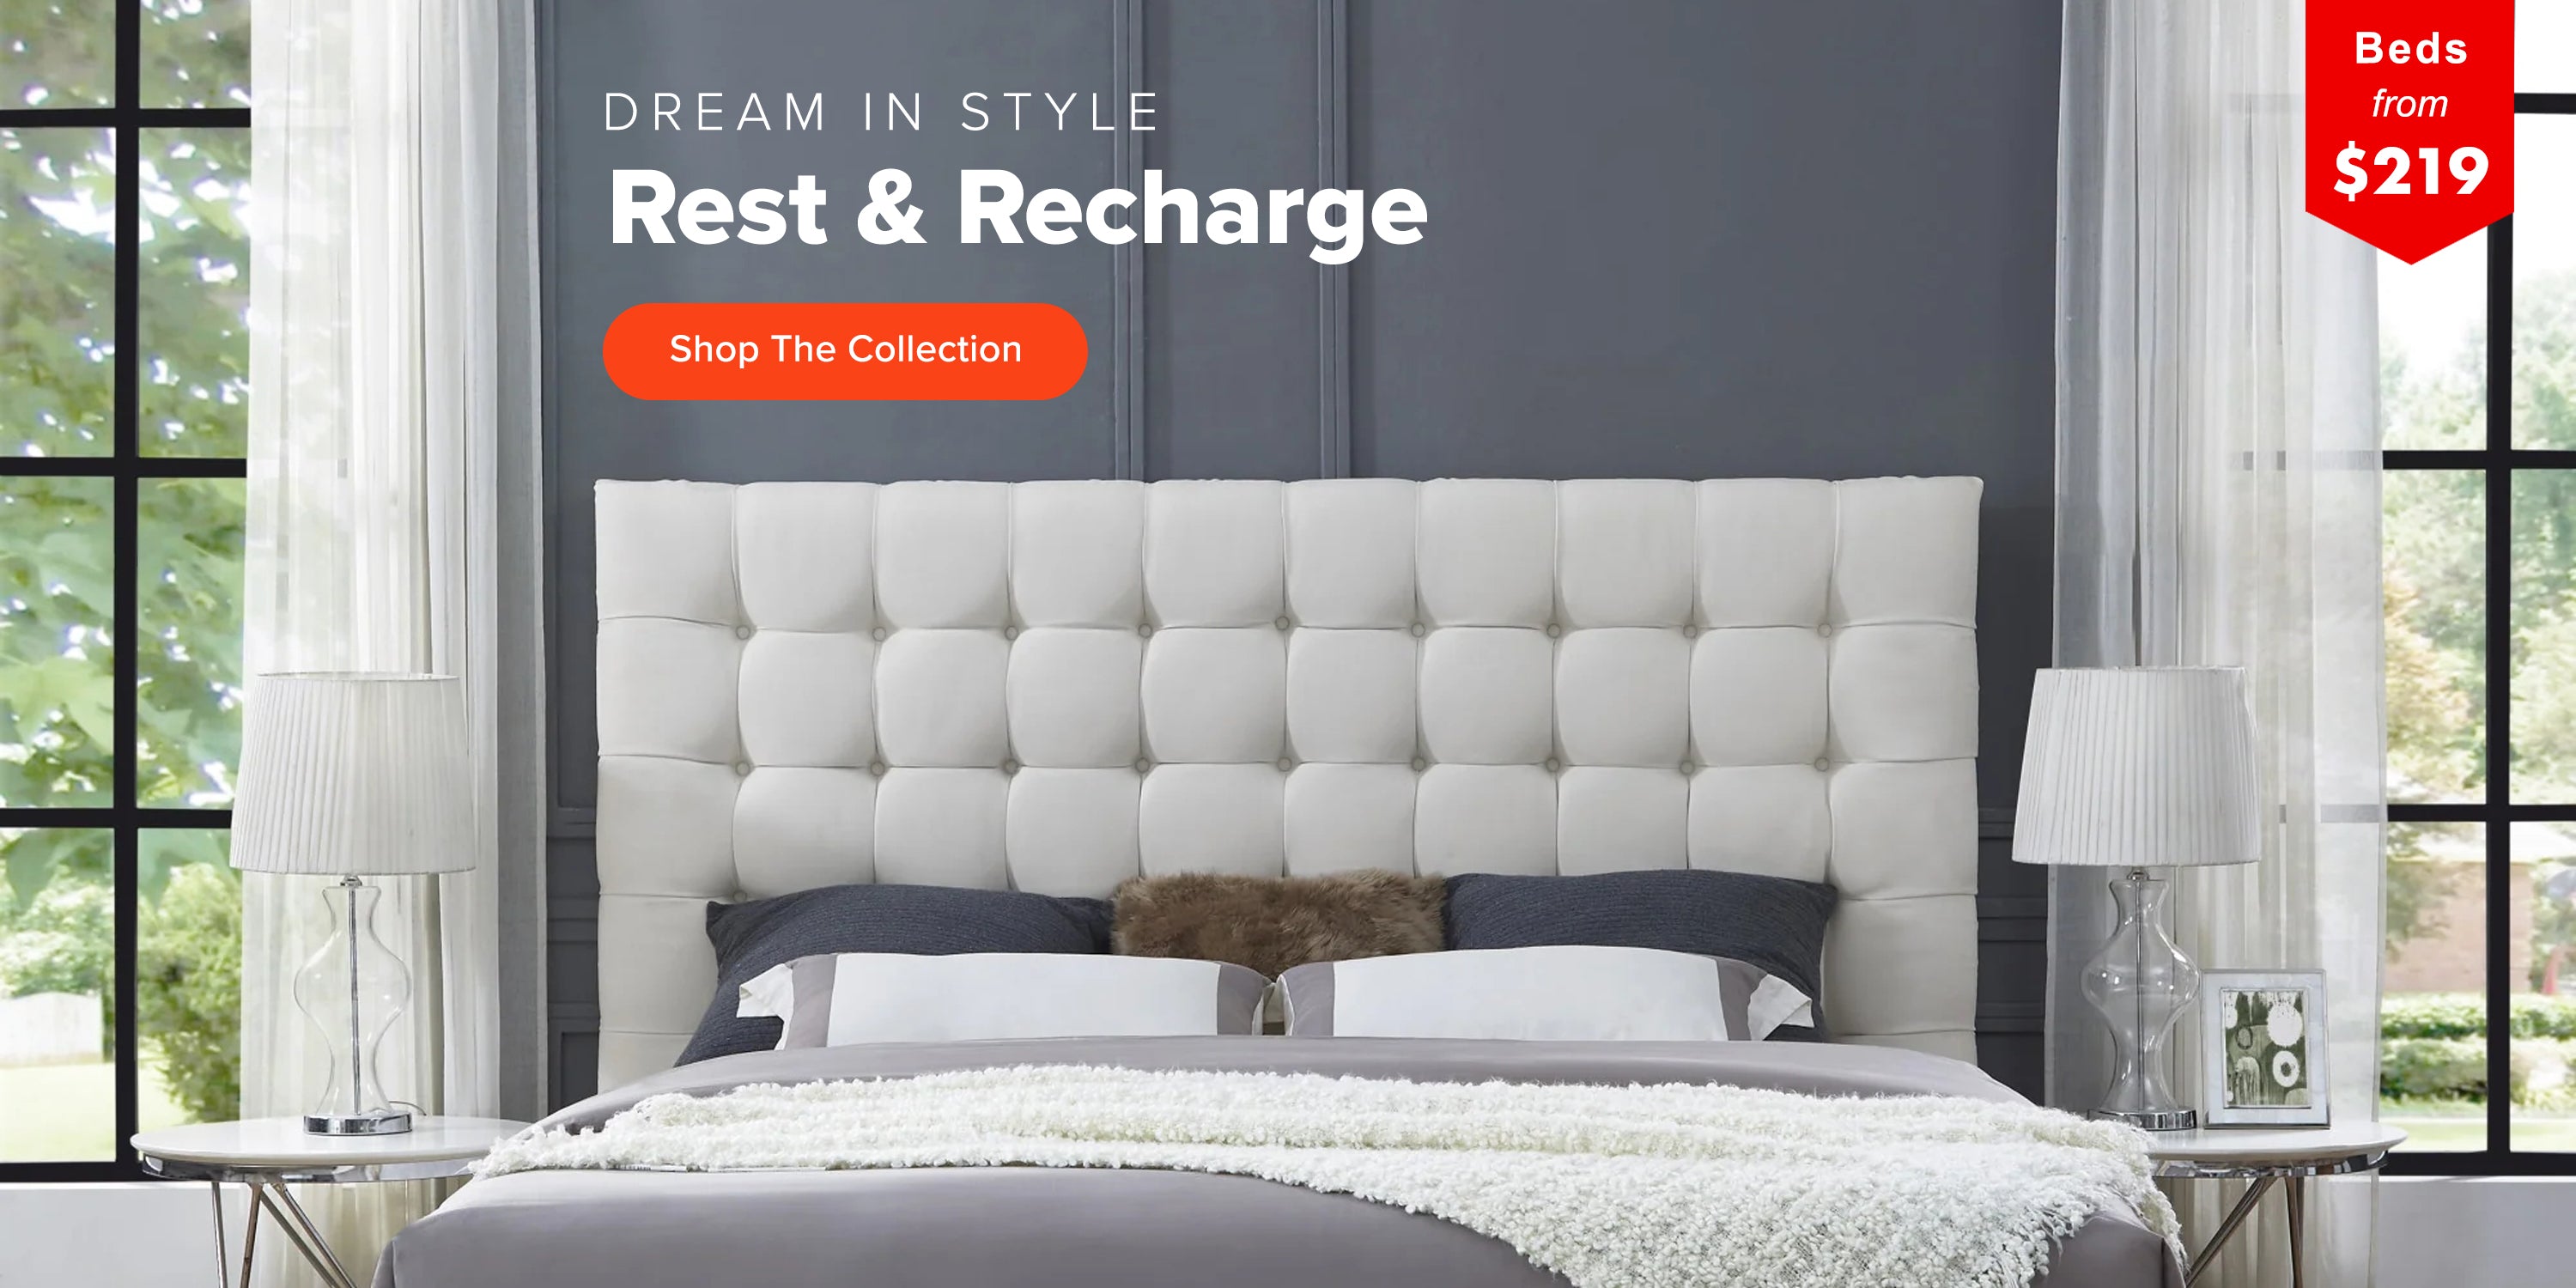 Dream in Style - Rest & Recharge - Bedroom Furniture